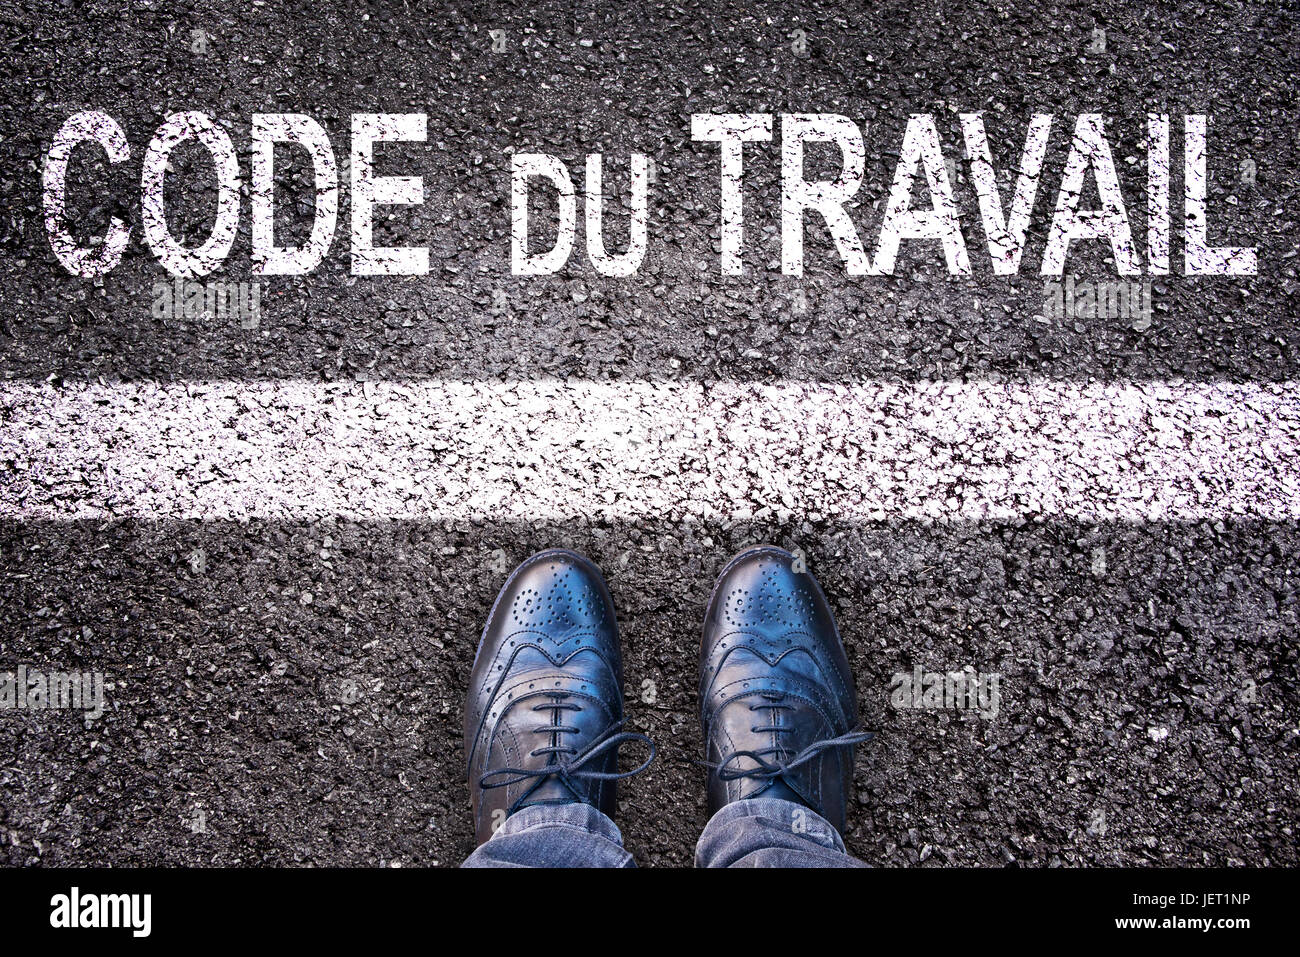 Code du travail (meaning labor code in French) written on an asphalt road background with legs Stock Photo